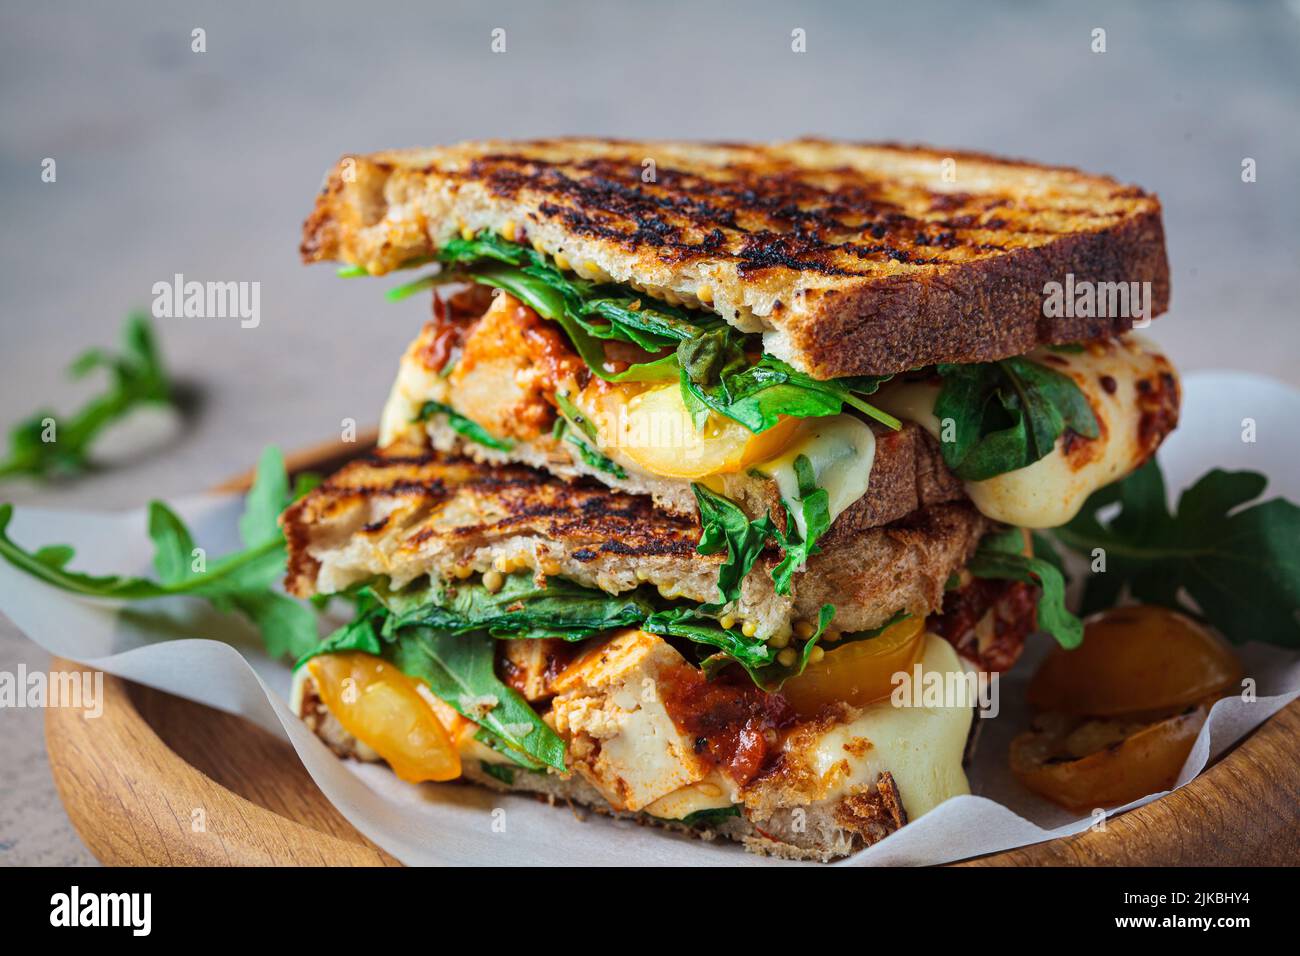 Grilled sandwich with vegetables and mozzarella on a wooden board. Stock Photo